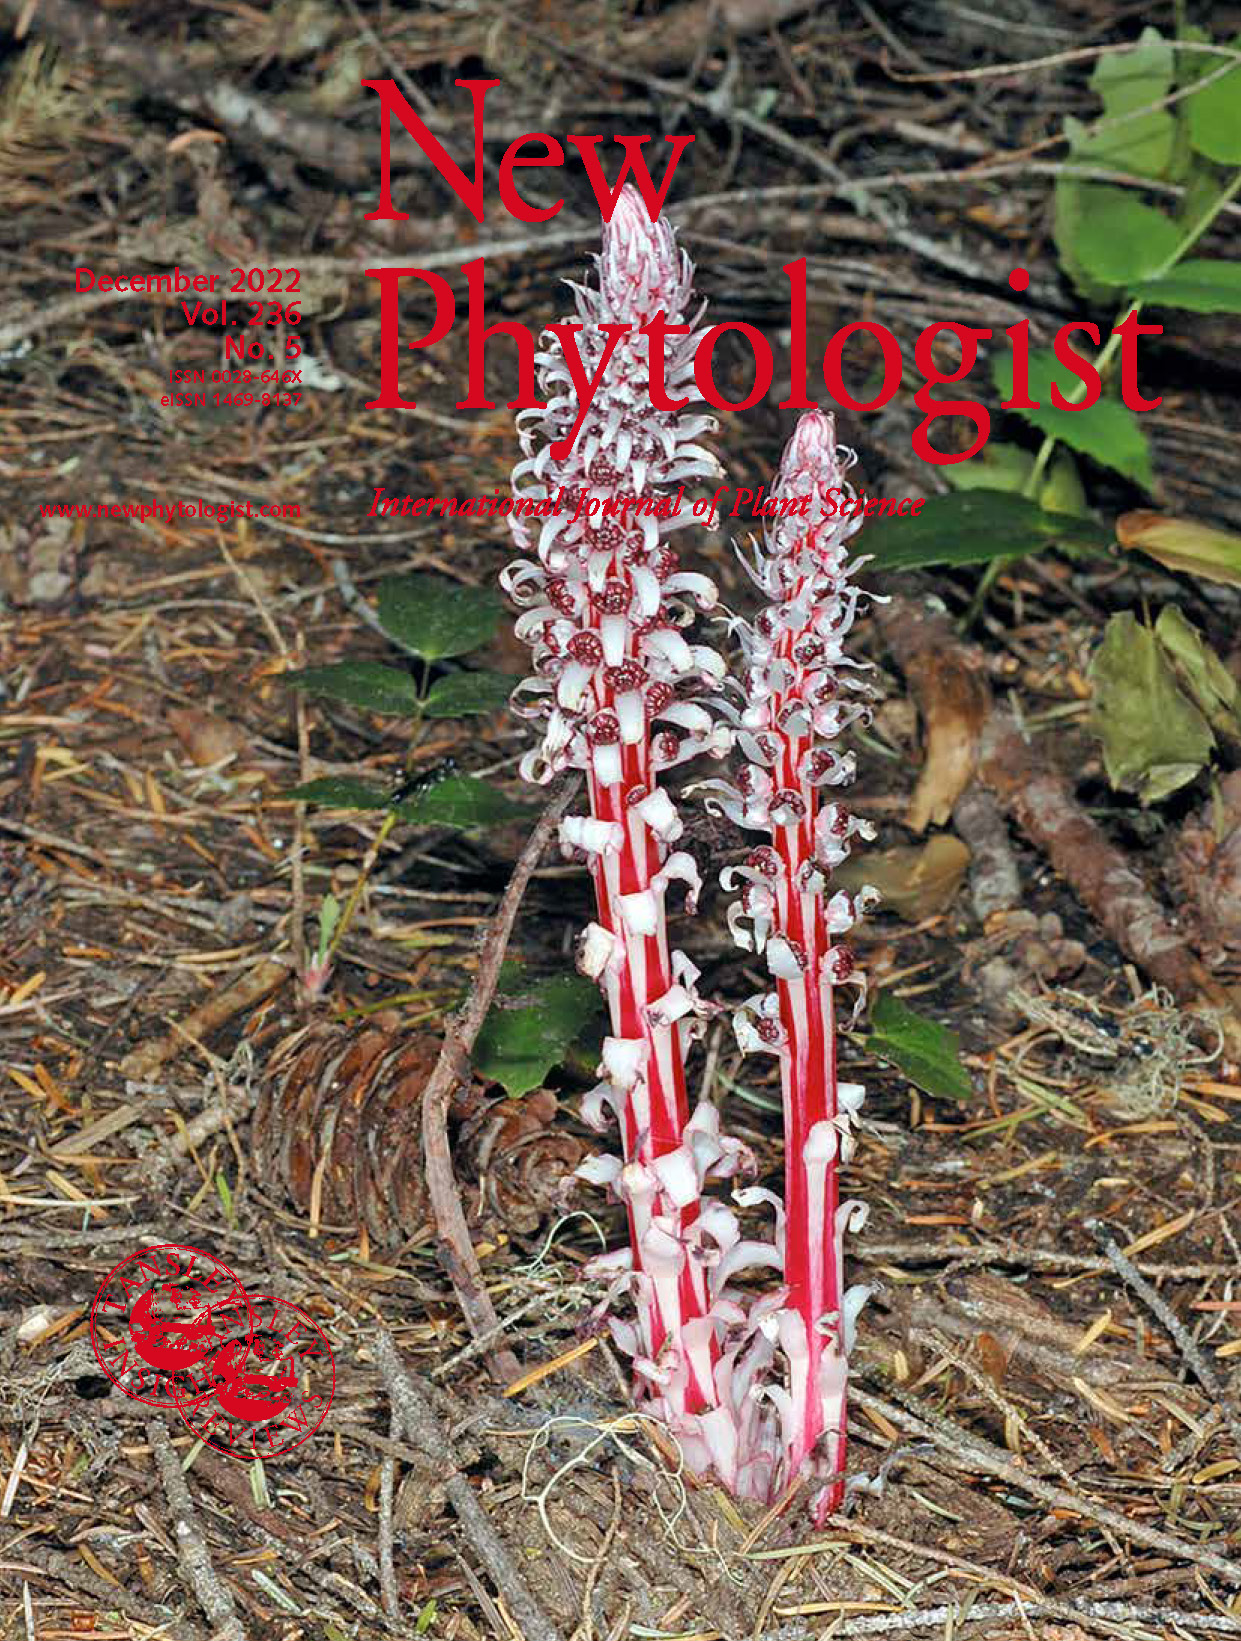 image of sugarsticks which are red and pink mycoheterotrophic plants